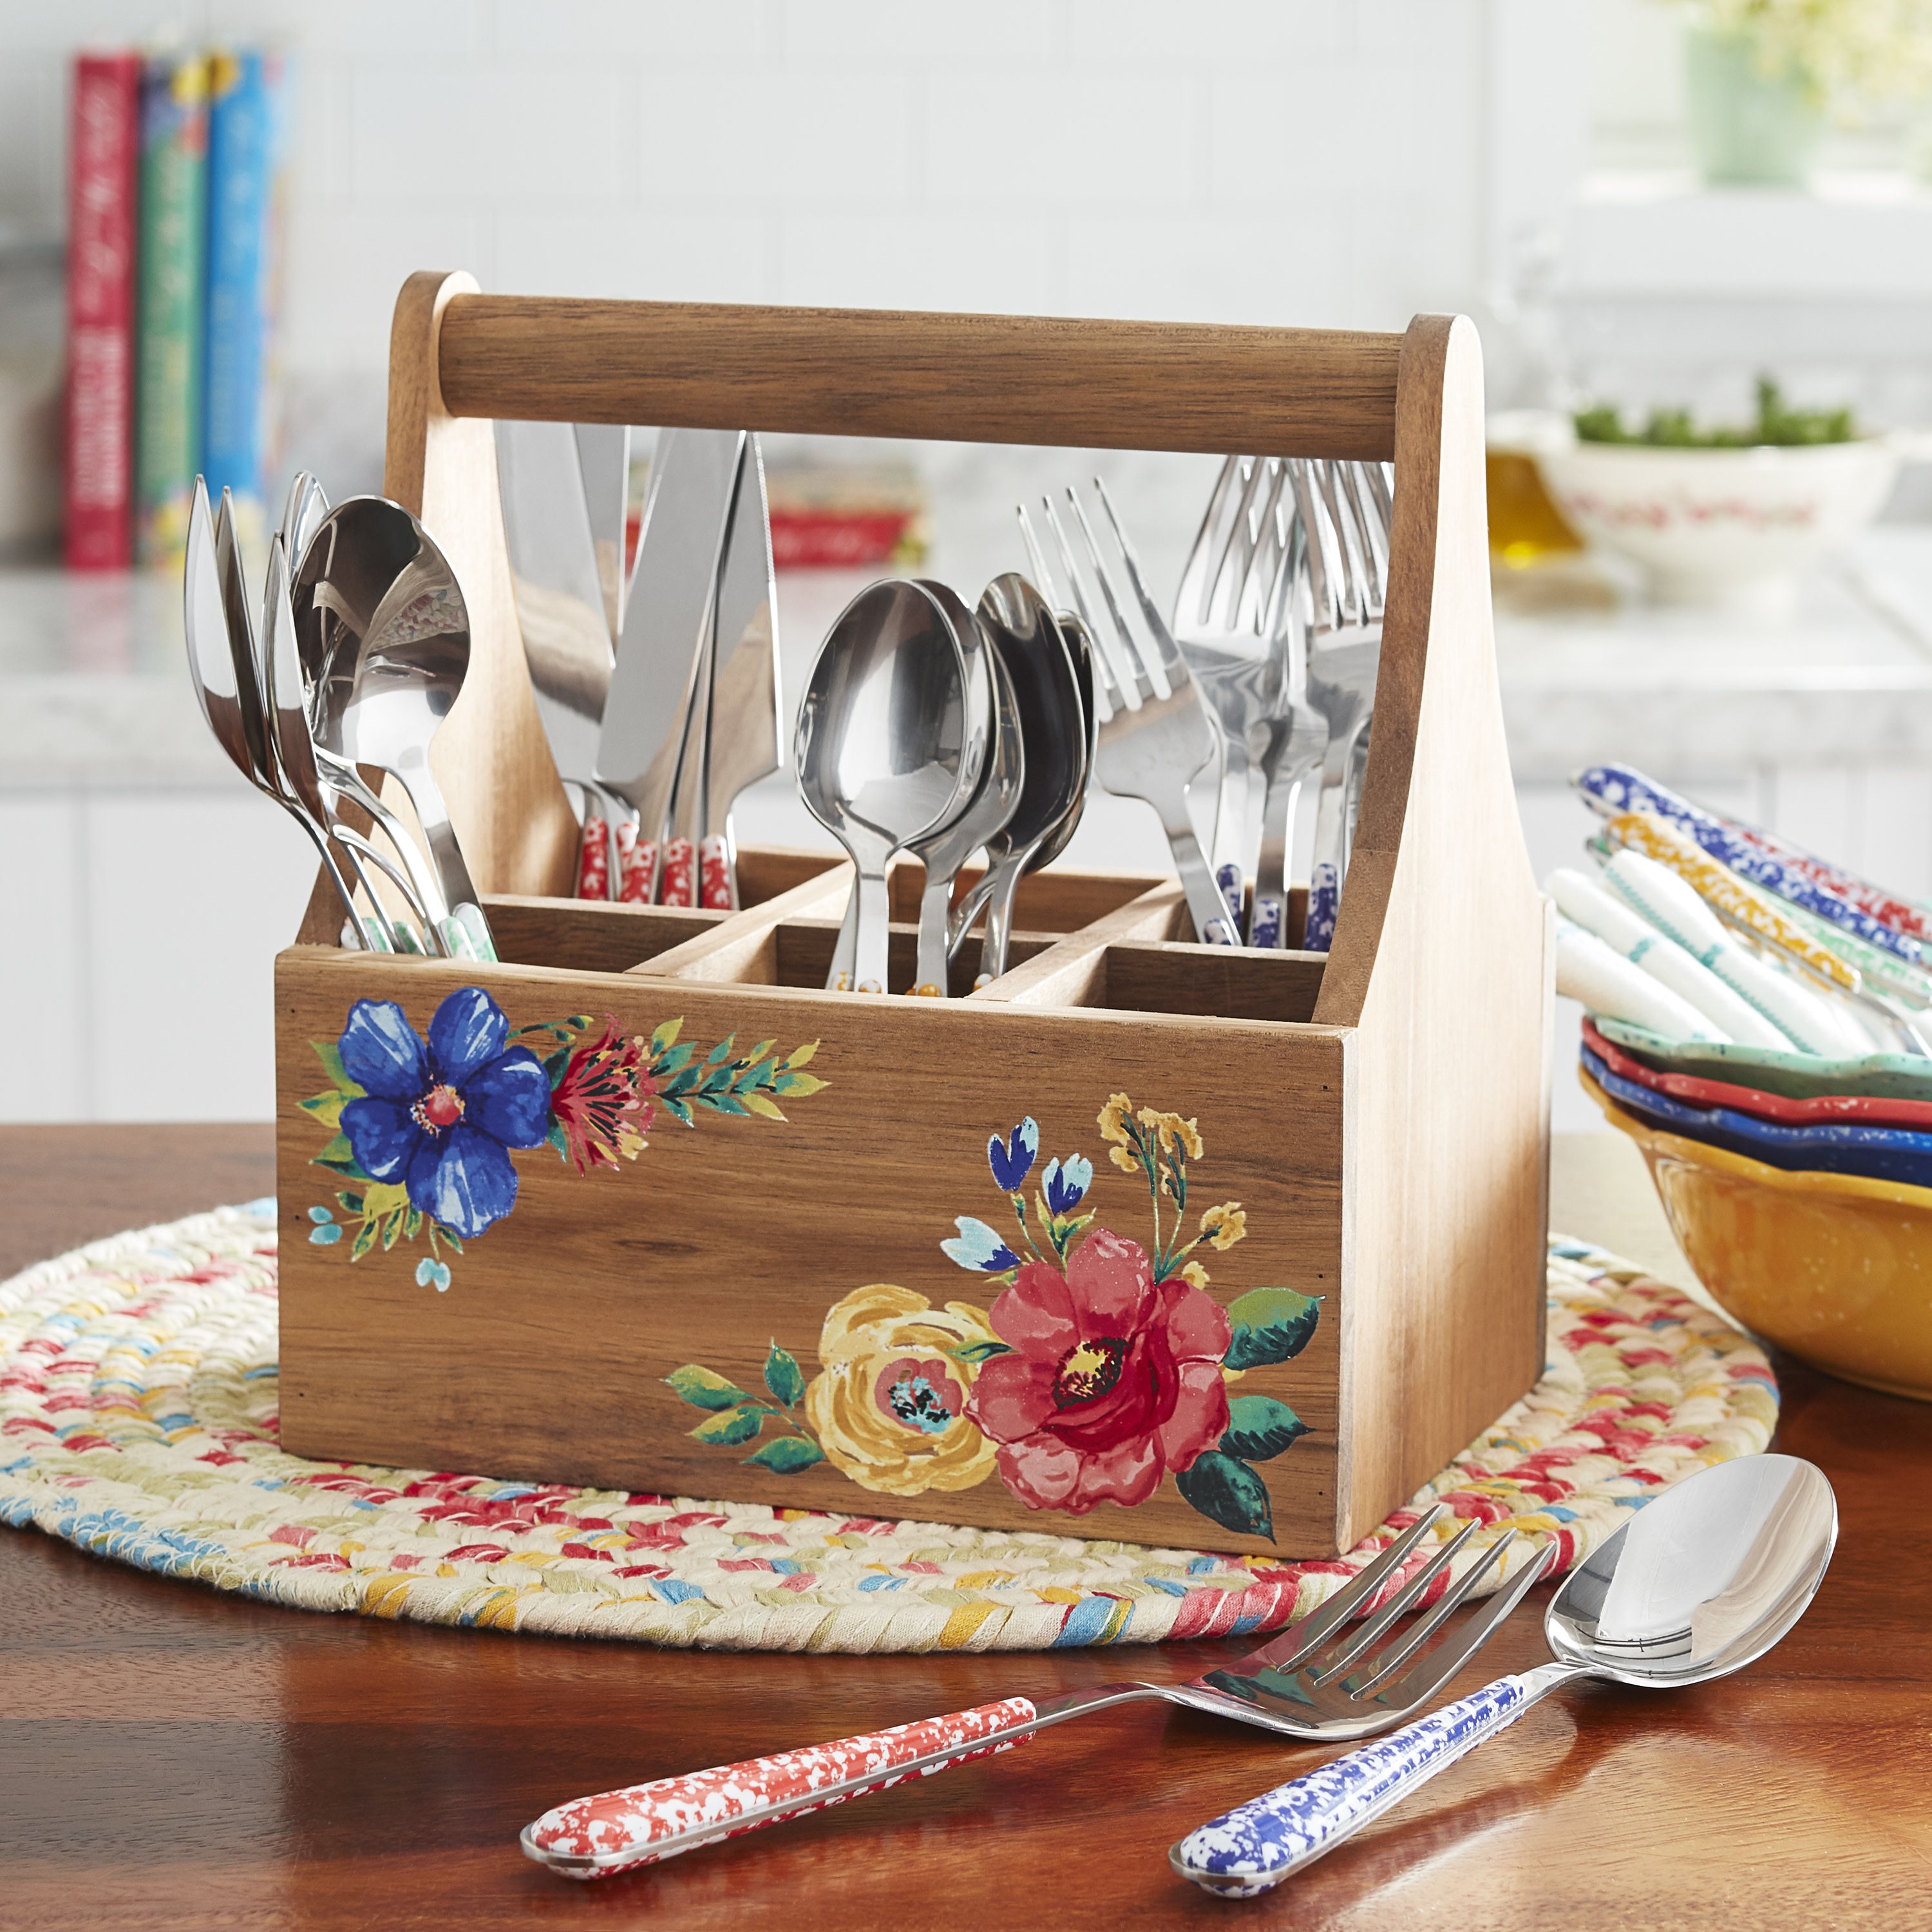 https://hips.hearstapps.com/hmg-prod/images/the-pioneer-woman-flatware-caddy-1631721499.jpeg